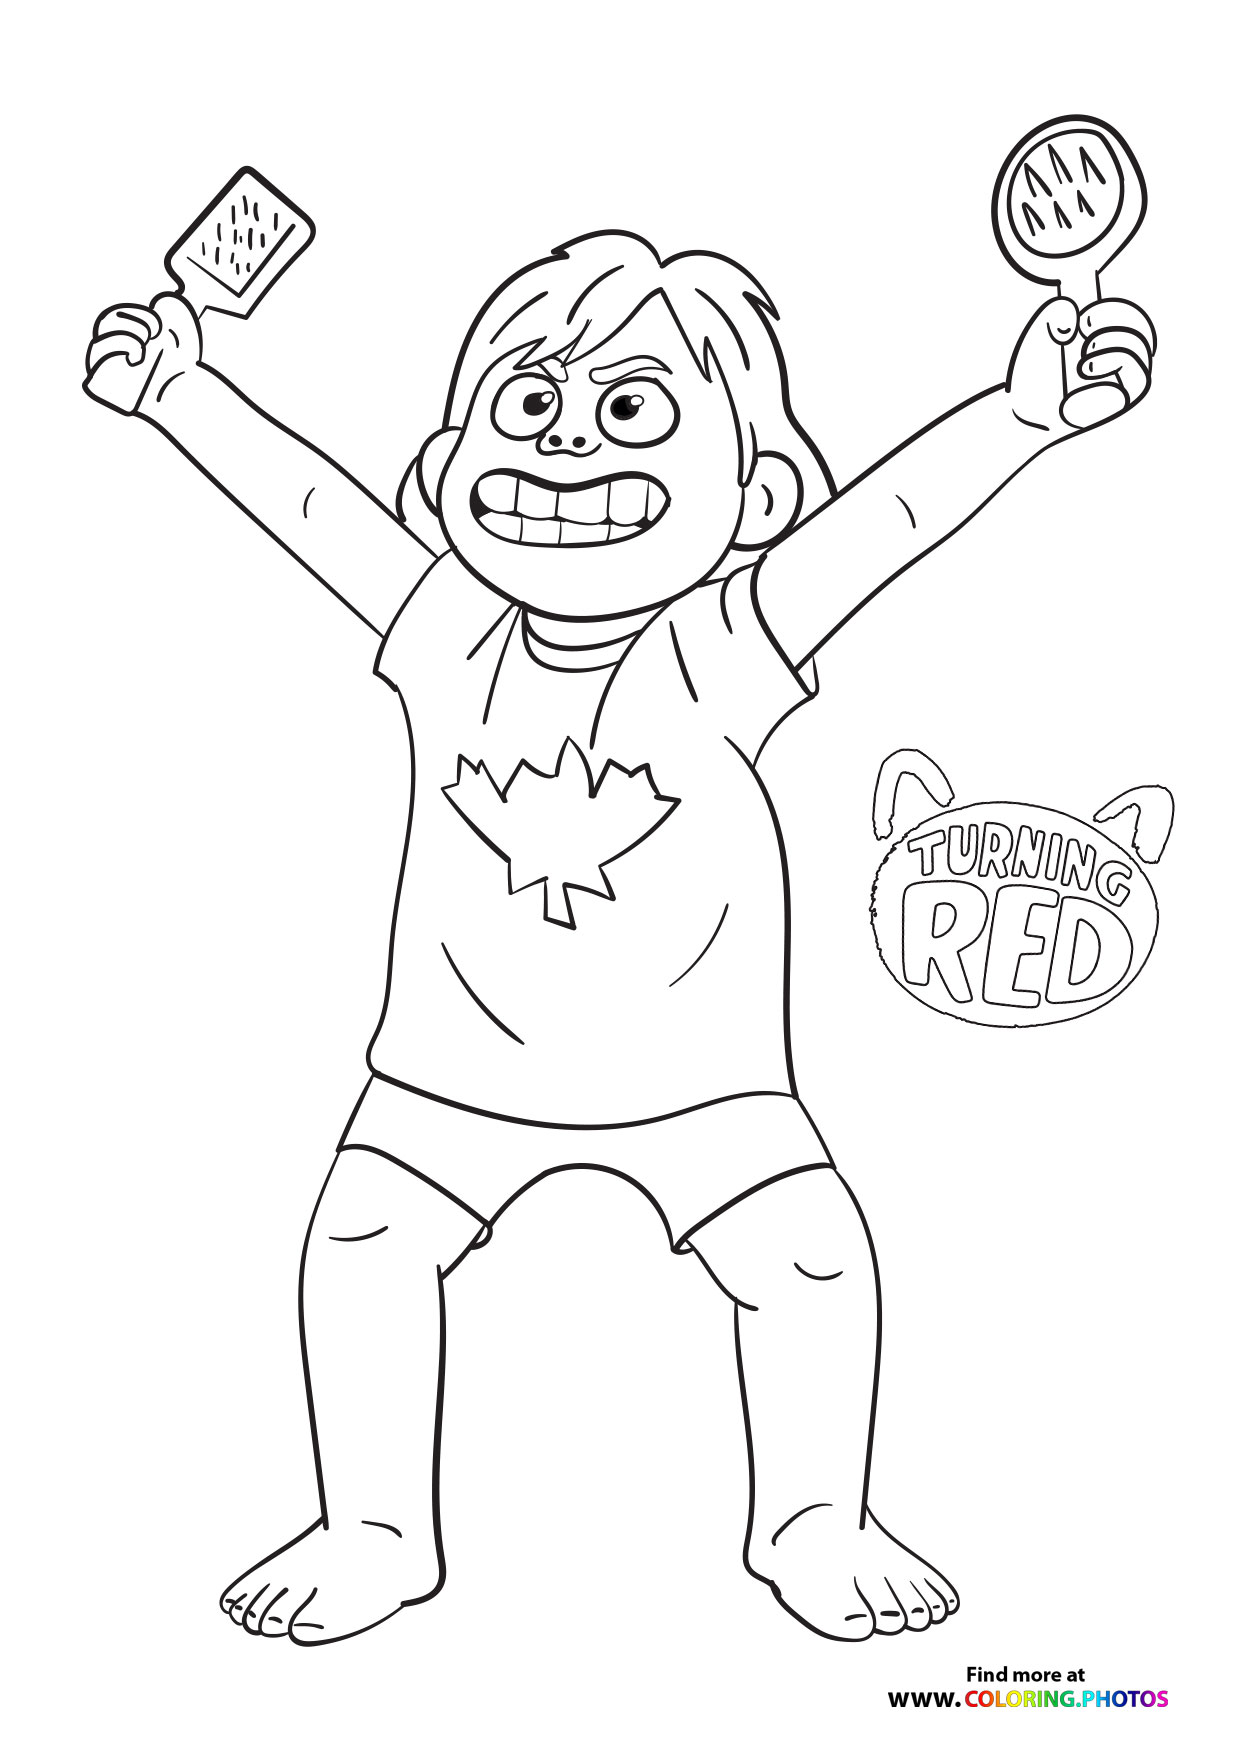 Turning Red coloring pages | Free printable sheets and pages. Find more...